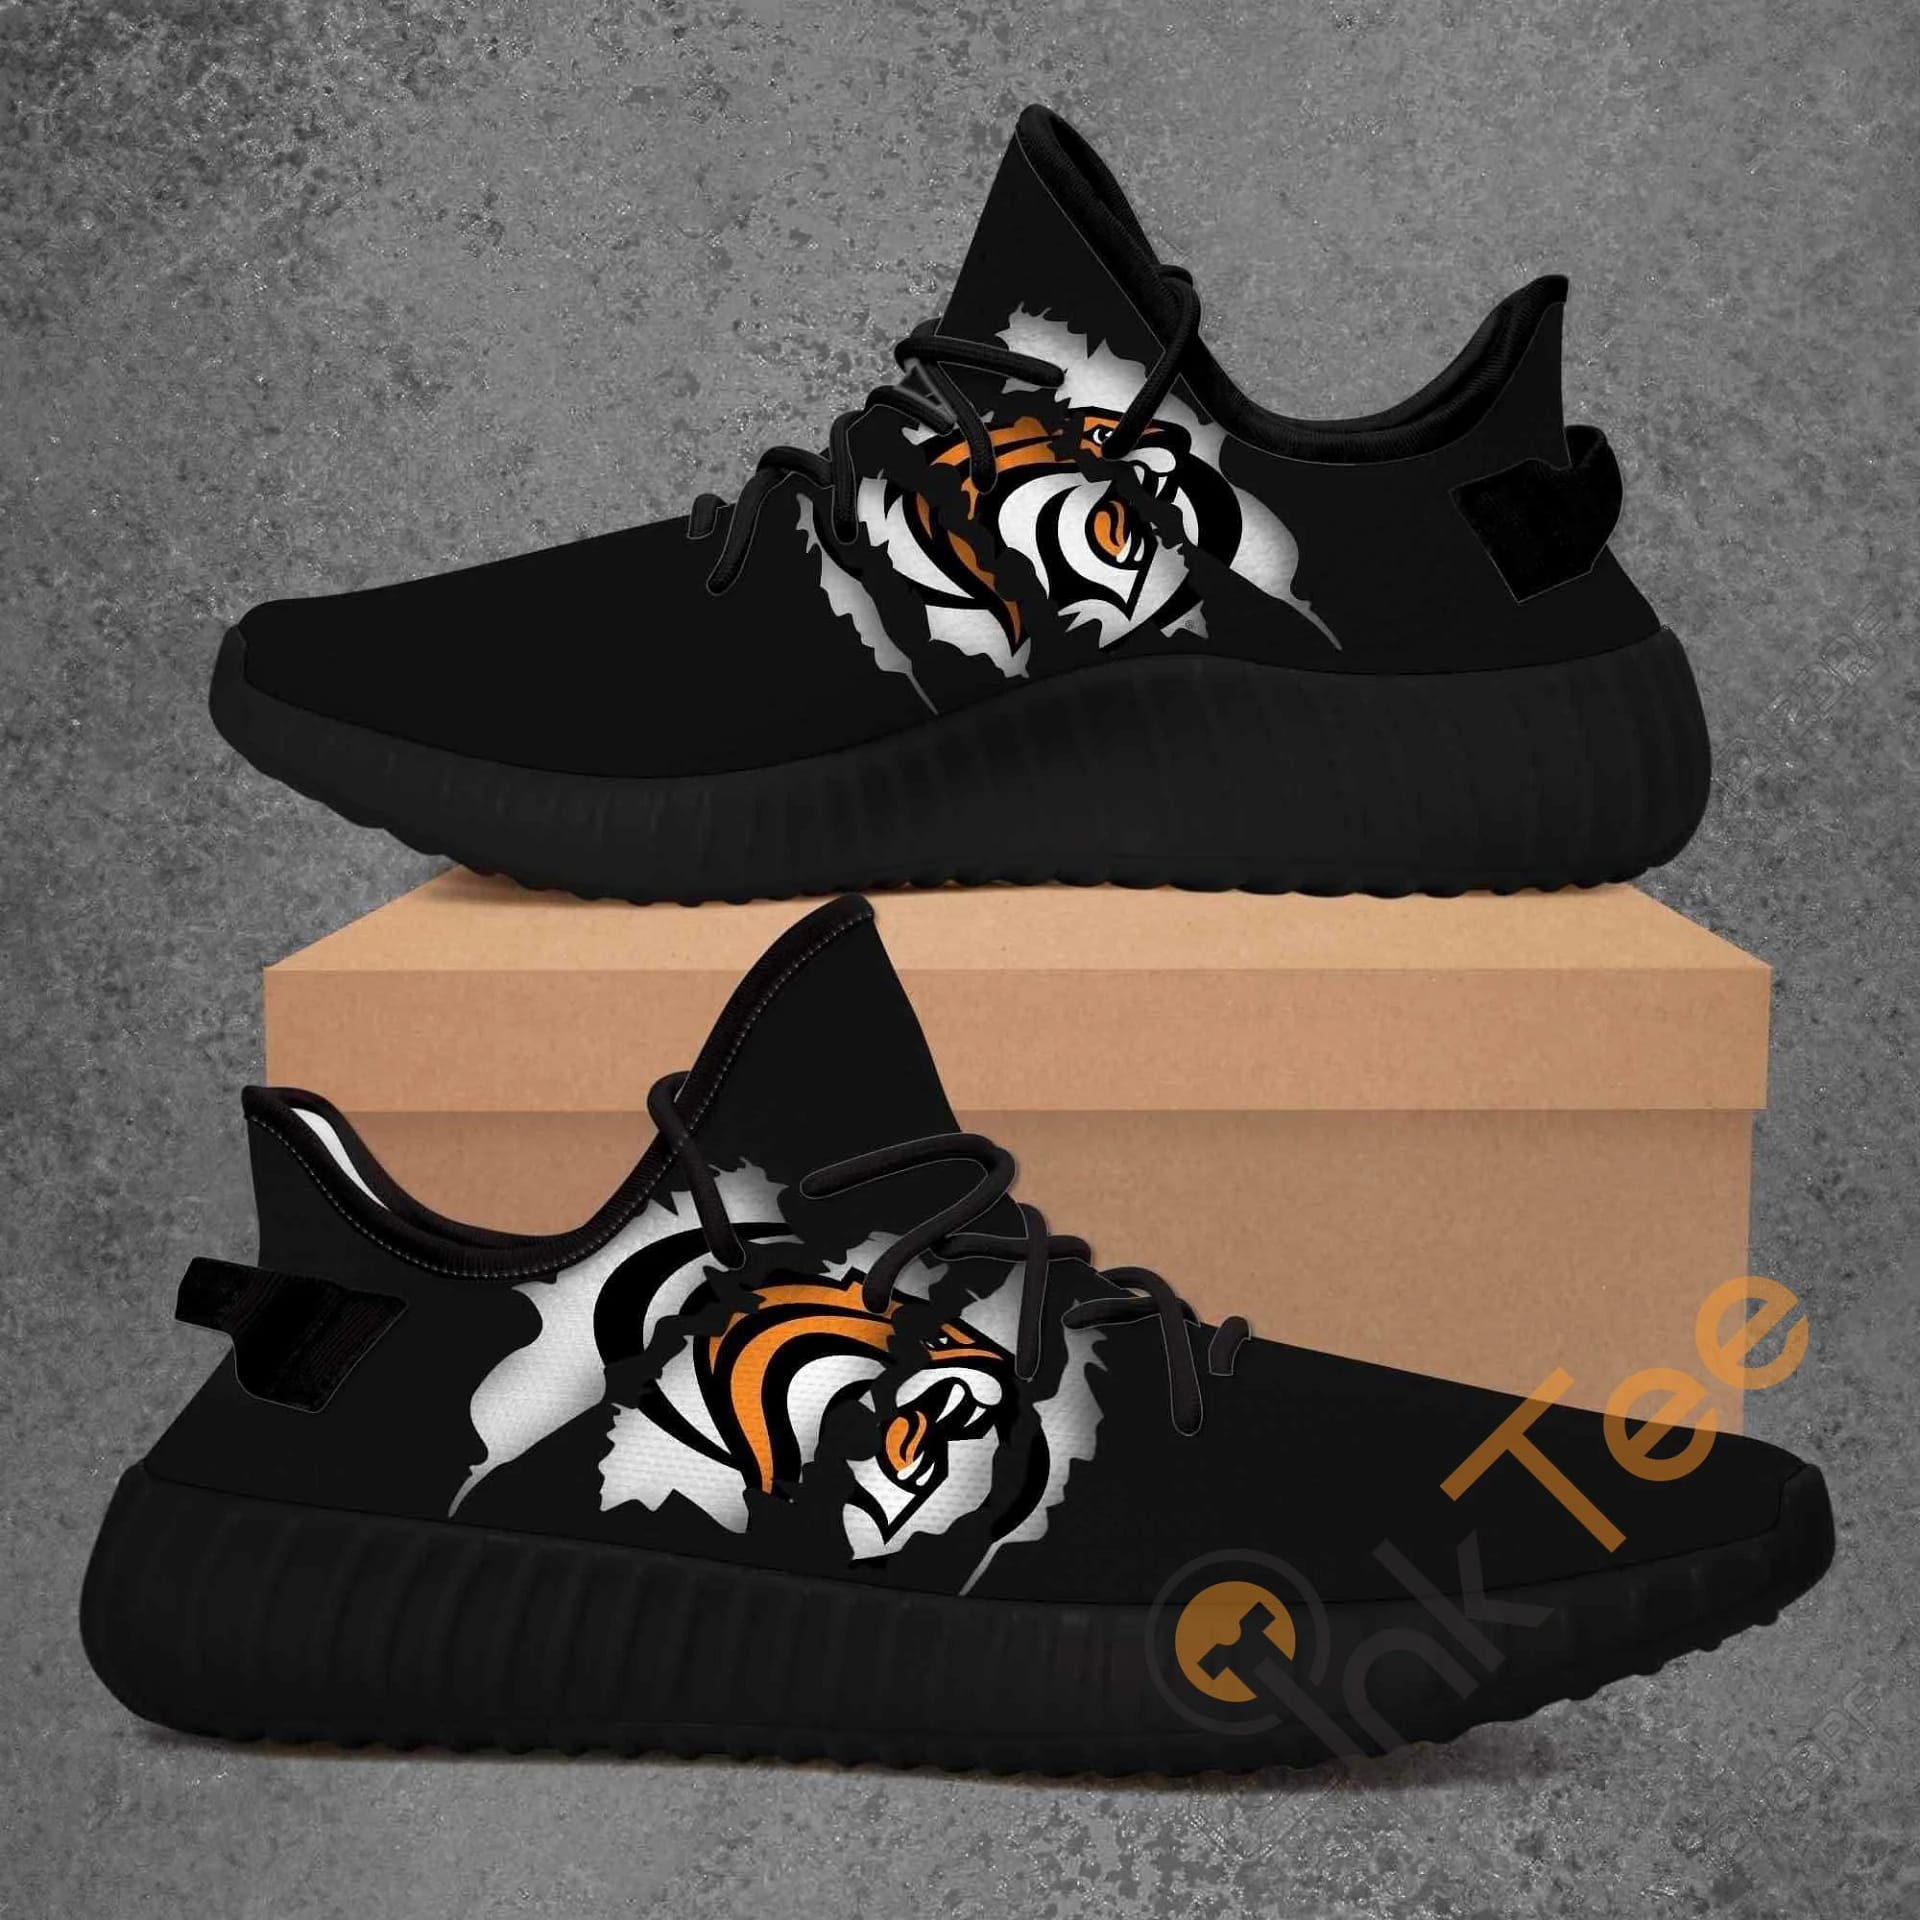 Pacific Tigers Ncaa Amazon Best Selling Yeezy Boost